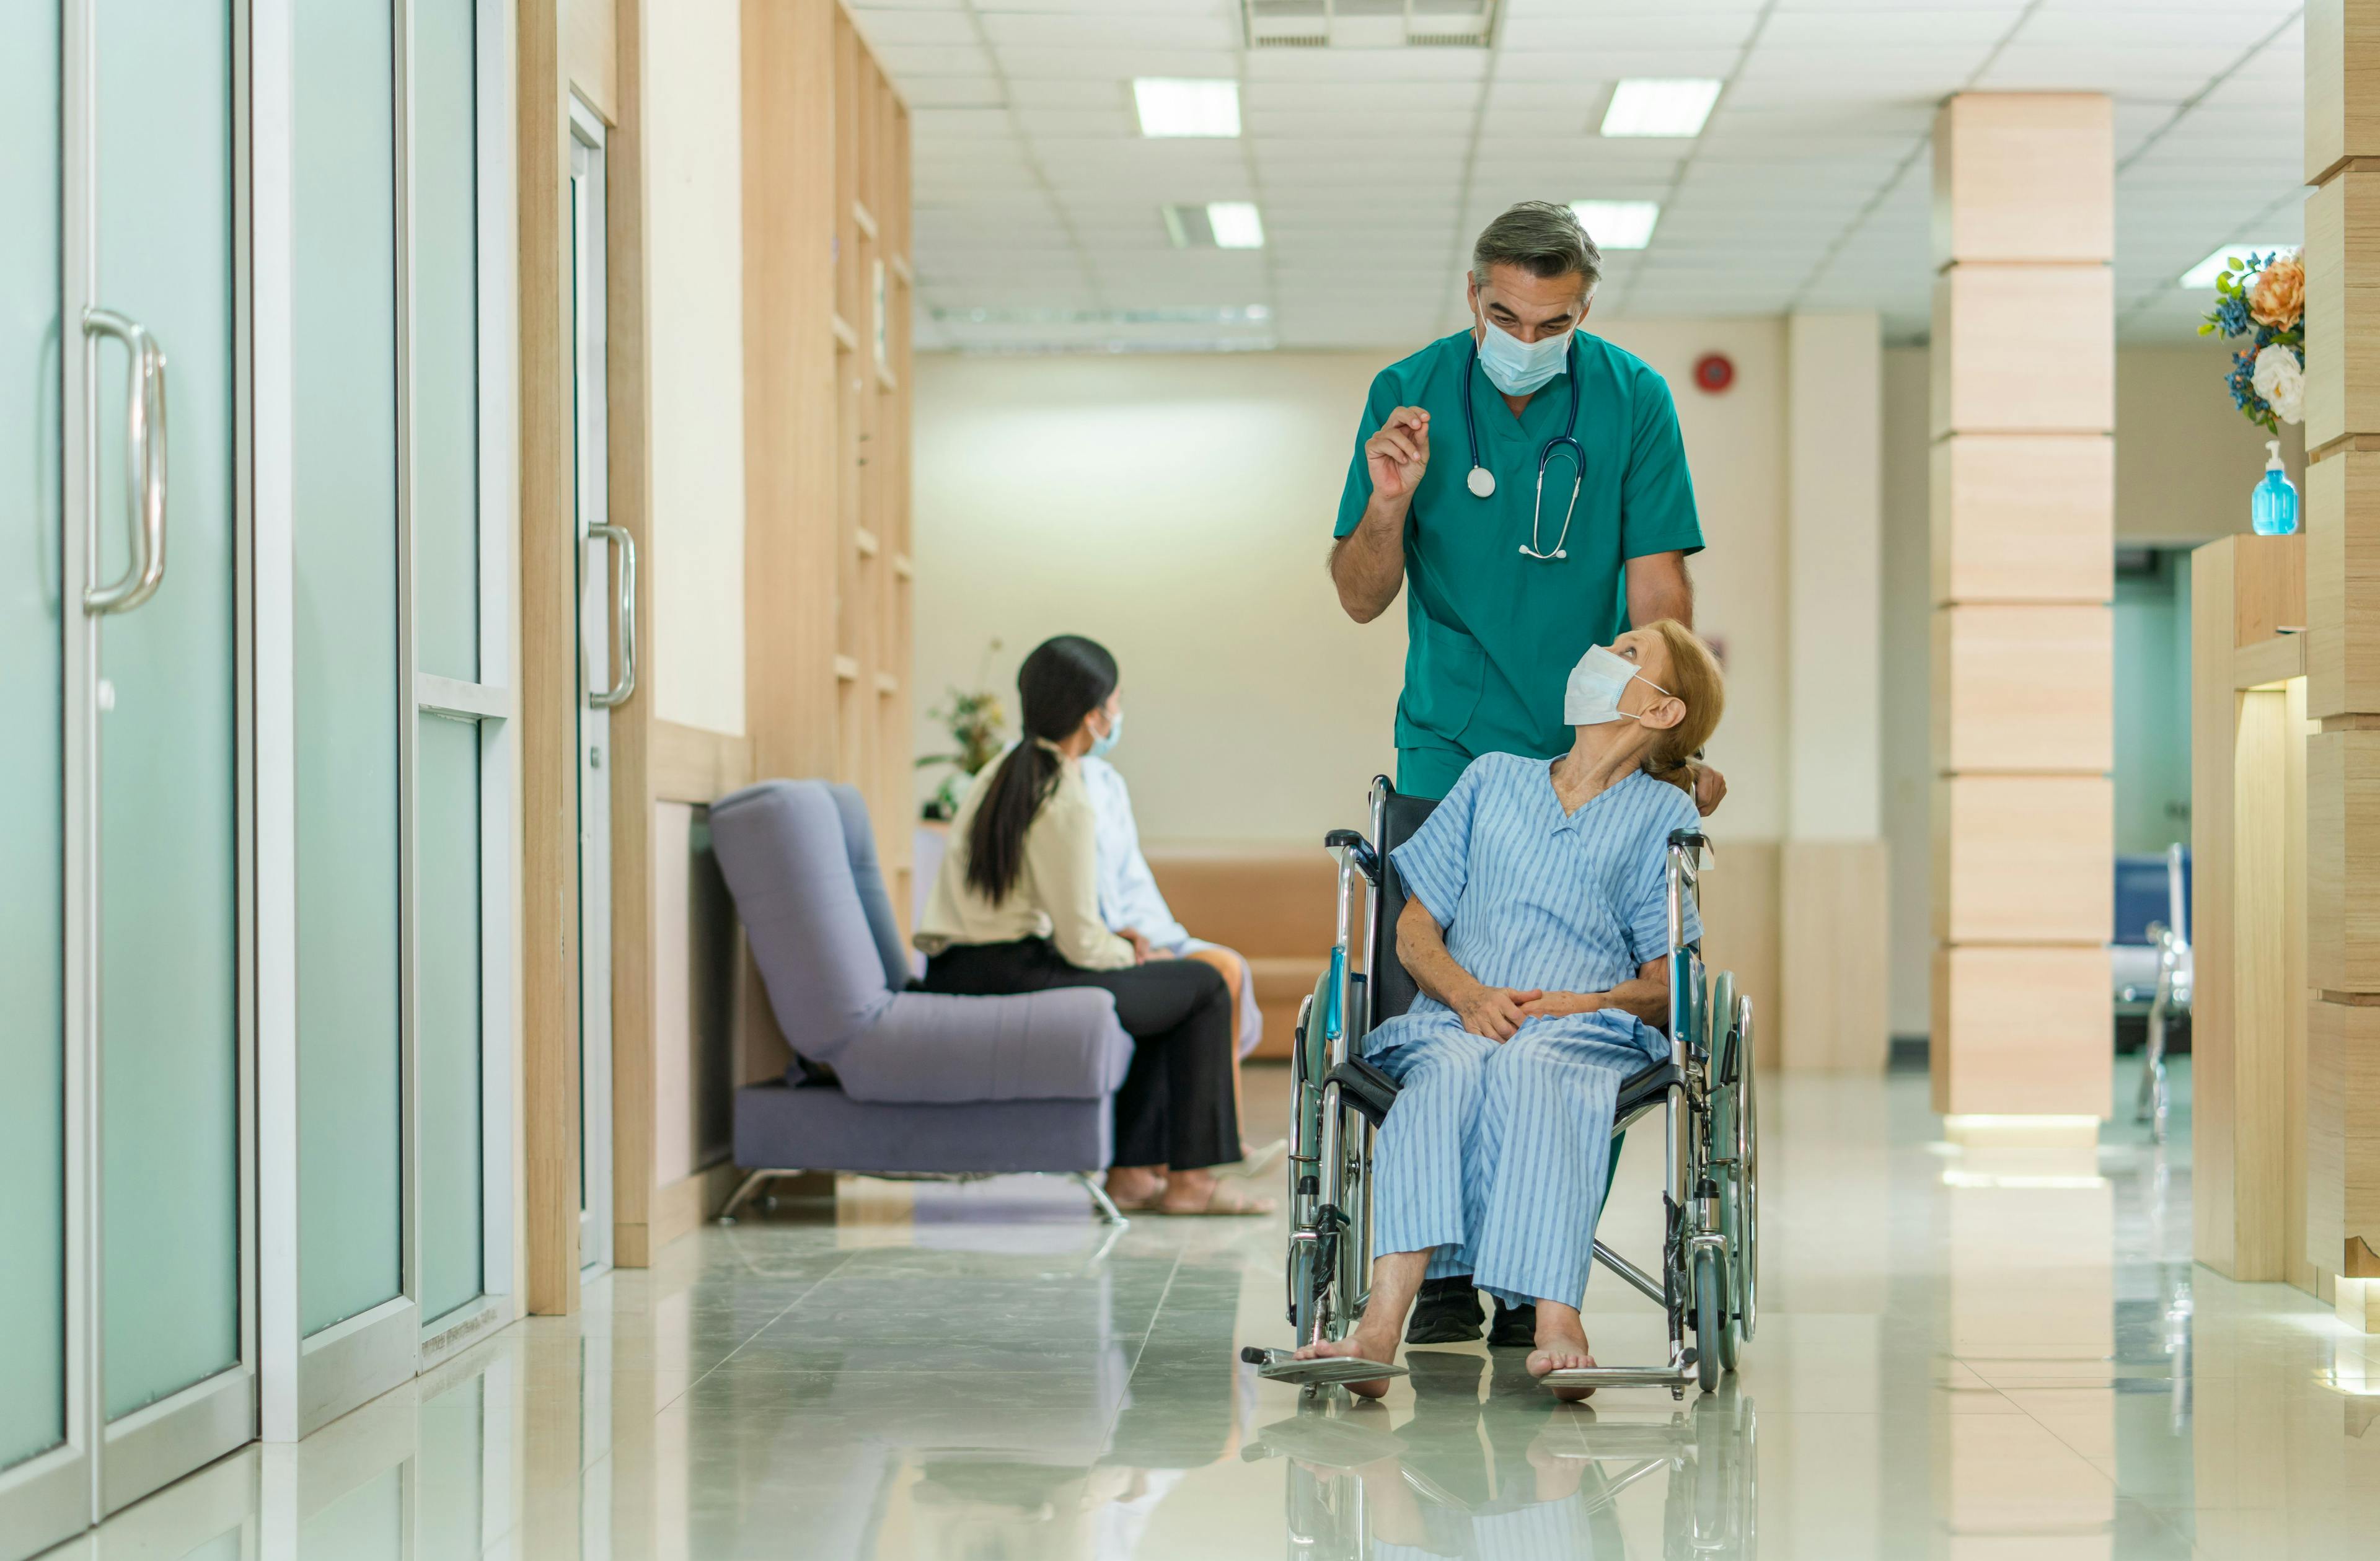 Hospitals see setbacks in patient safety, Leapfrog Group finds